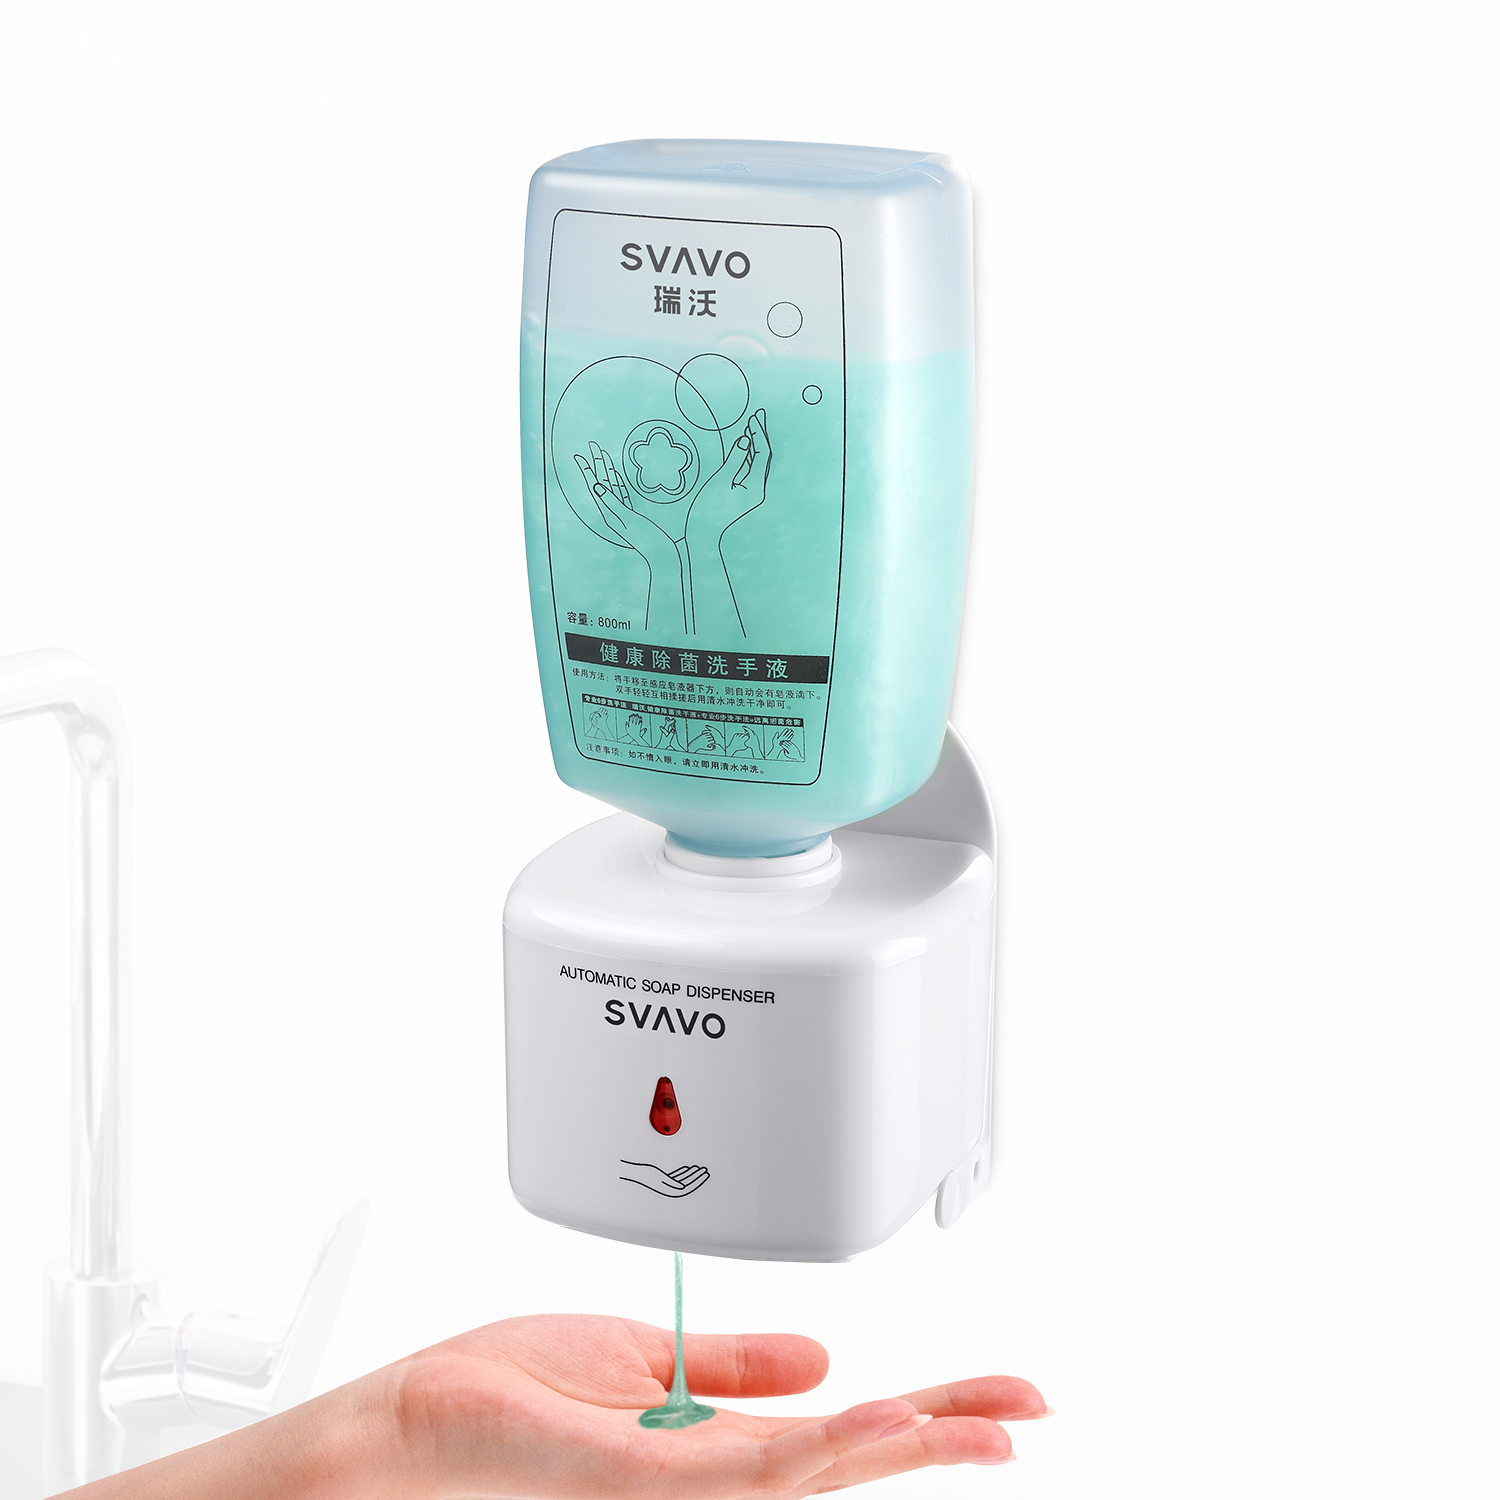 Wall Mounted Commercial Automatic Soap Dispenser V-450 